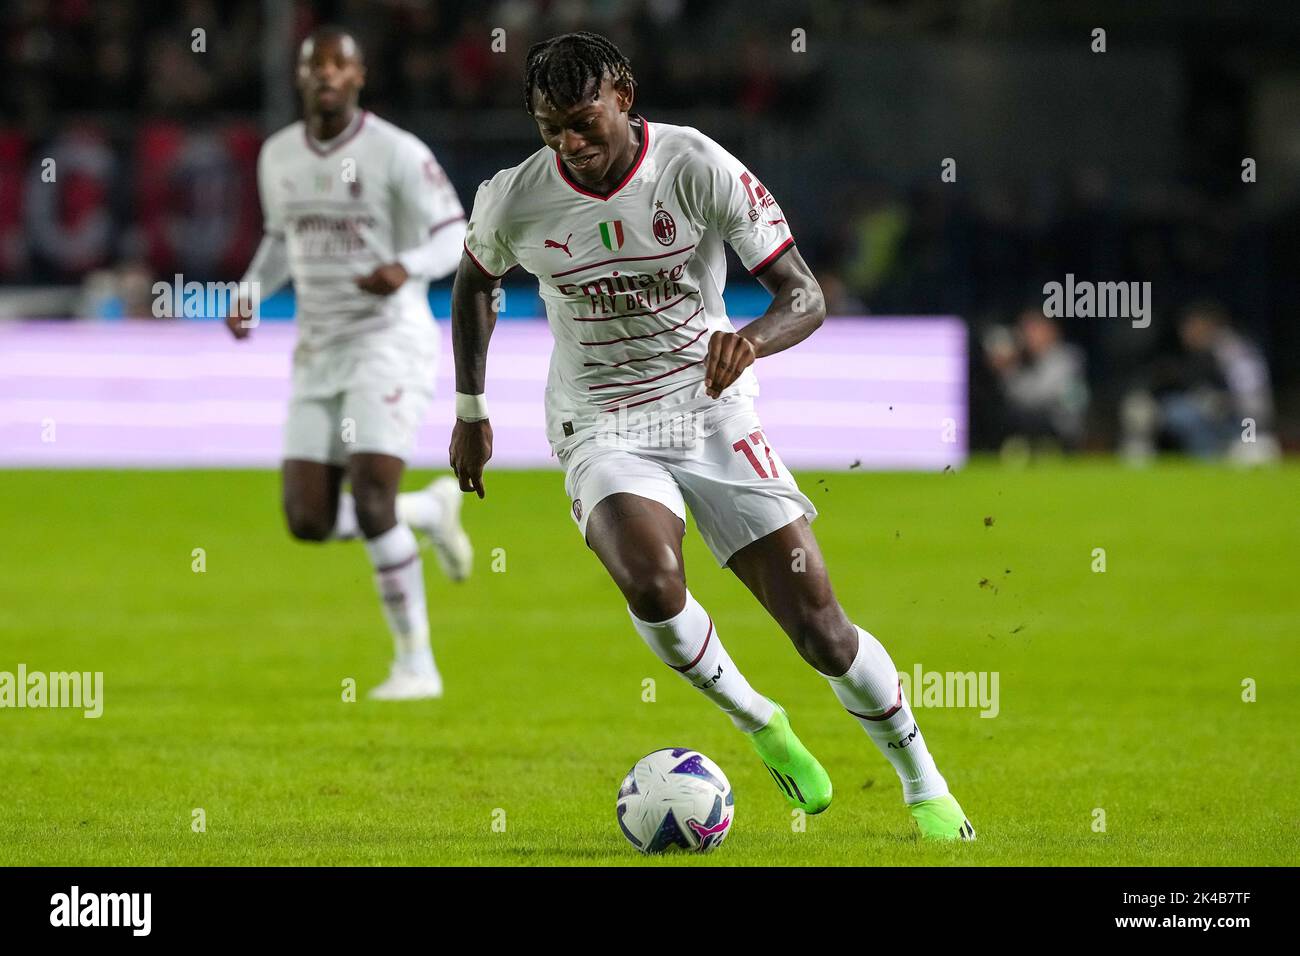 Empoli, Italy. 01st Oct, 2022. Rafael Leao of AC Milan in action during the Serie A football match between Empoli FC and AC Milan at Carlo Castellani stadium in Empoli (Italy), October 1st, 2022. Photo Paolo Nucci/Insidefoto Credit: Insidefoto di andrea staccioli/Alamy Live News Stock Photo